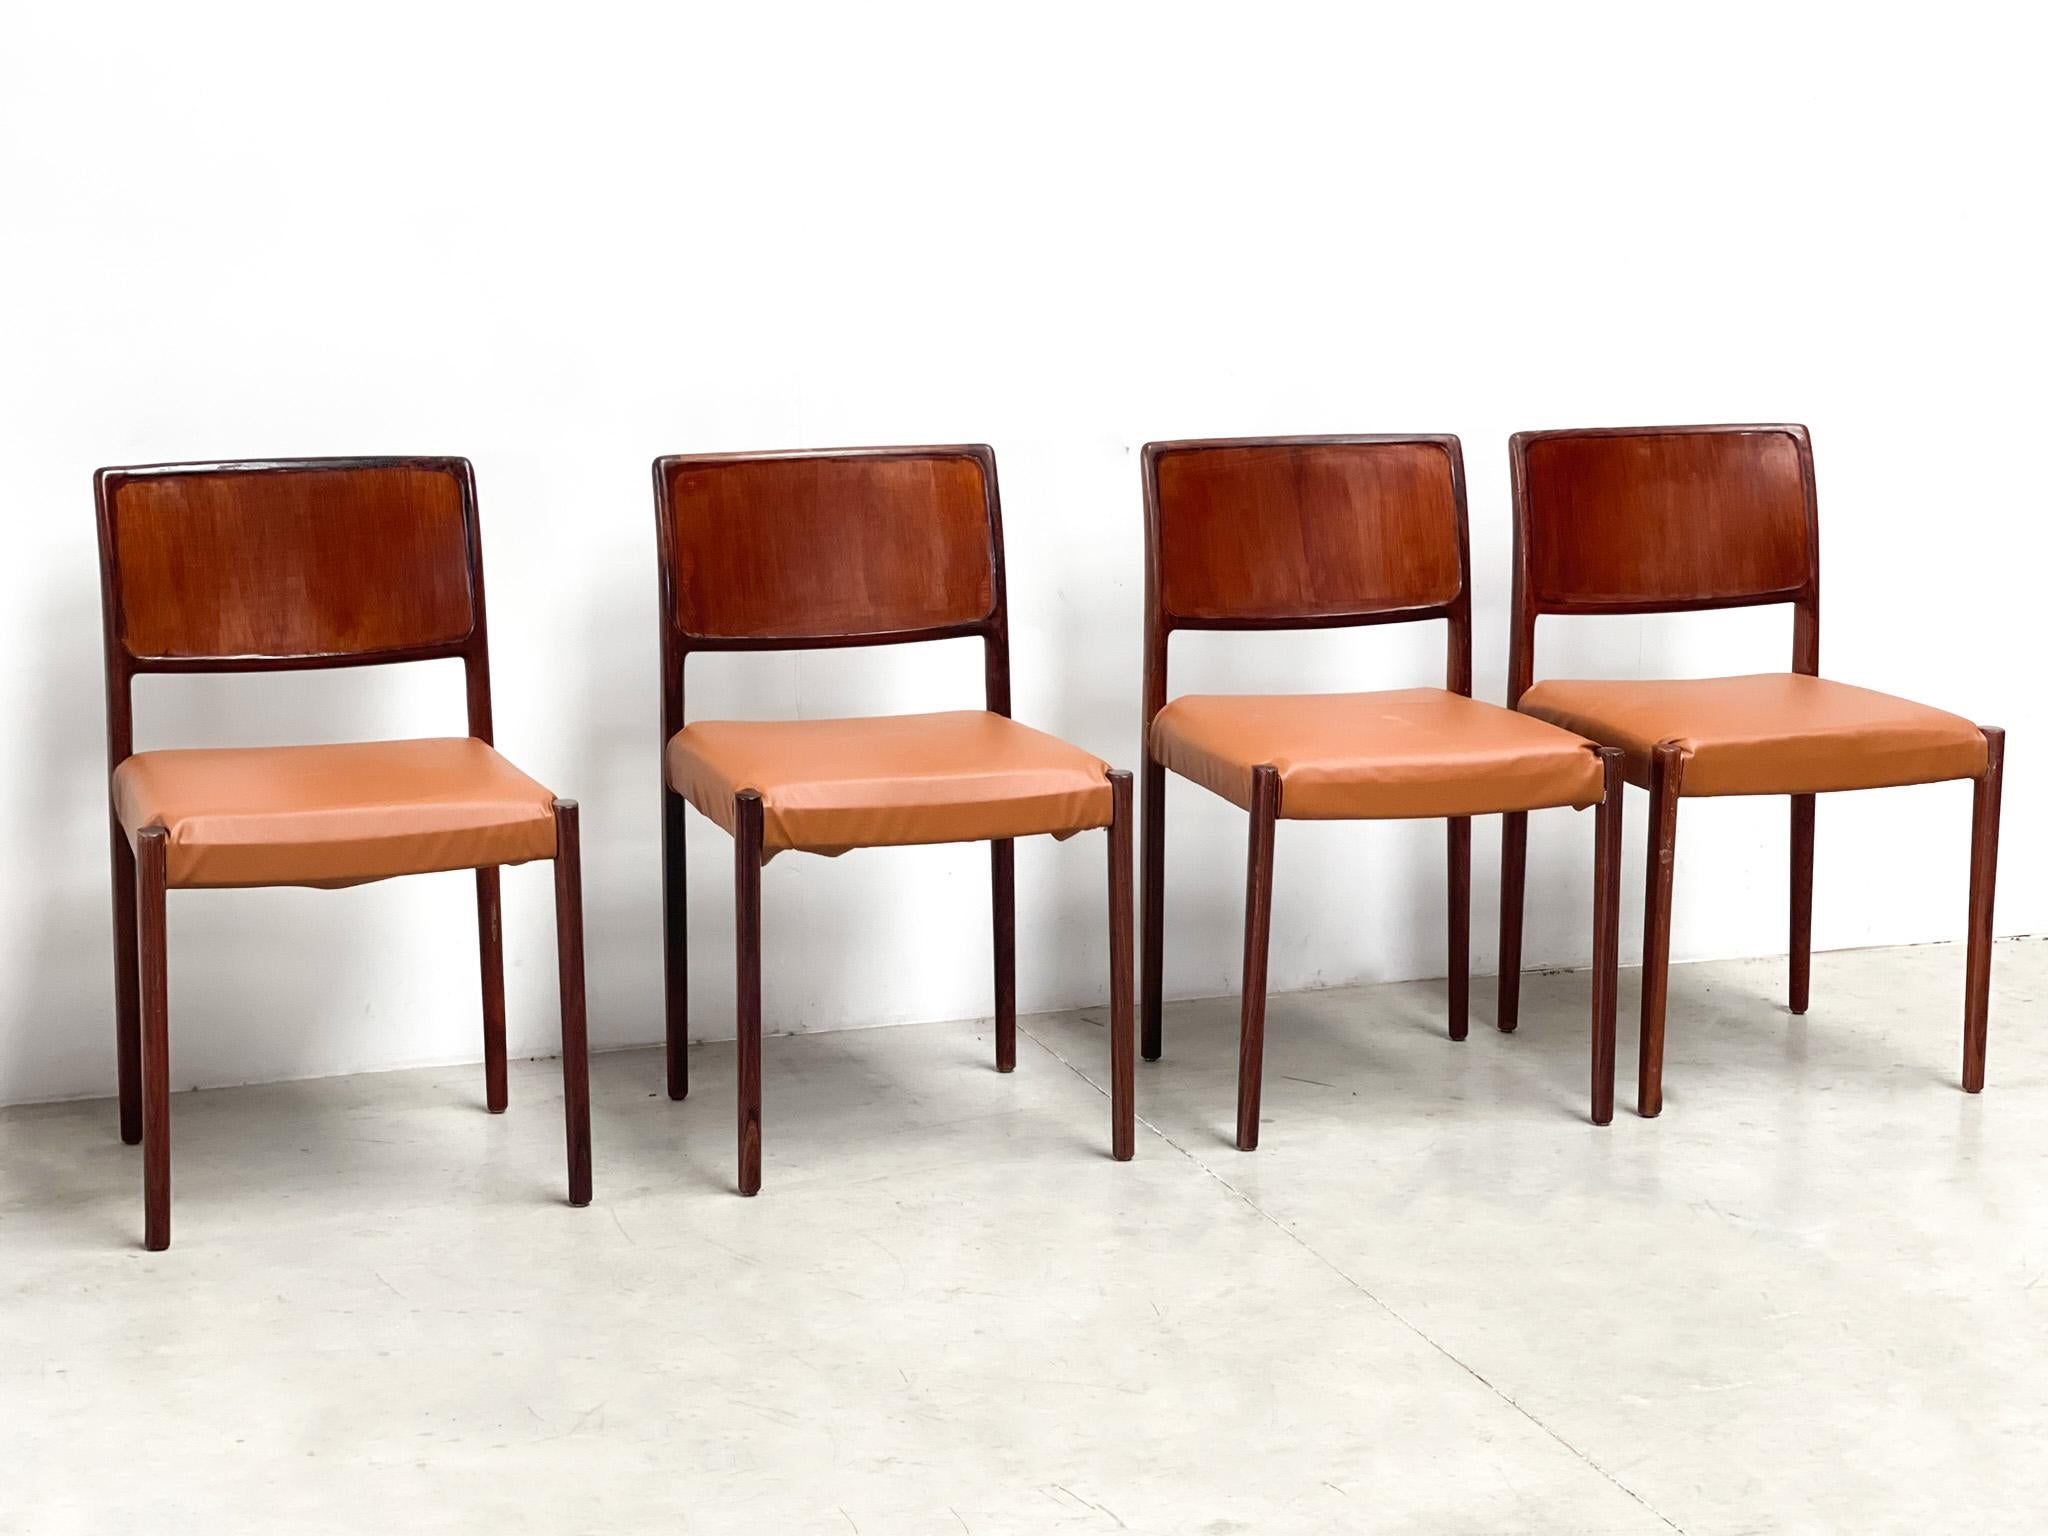 Vintage wooden dining chairs made in Denmark.

Wooden frames with cognac faux leather upholstery

1970s - Denmark

Good overall condition with normal age related wear to the frames.

Dimensions:
Height: 78cm/30.70